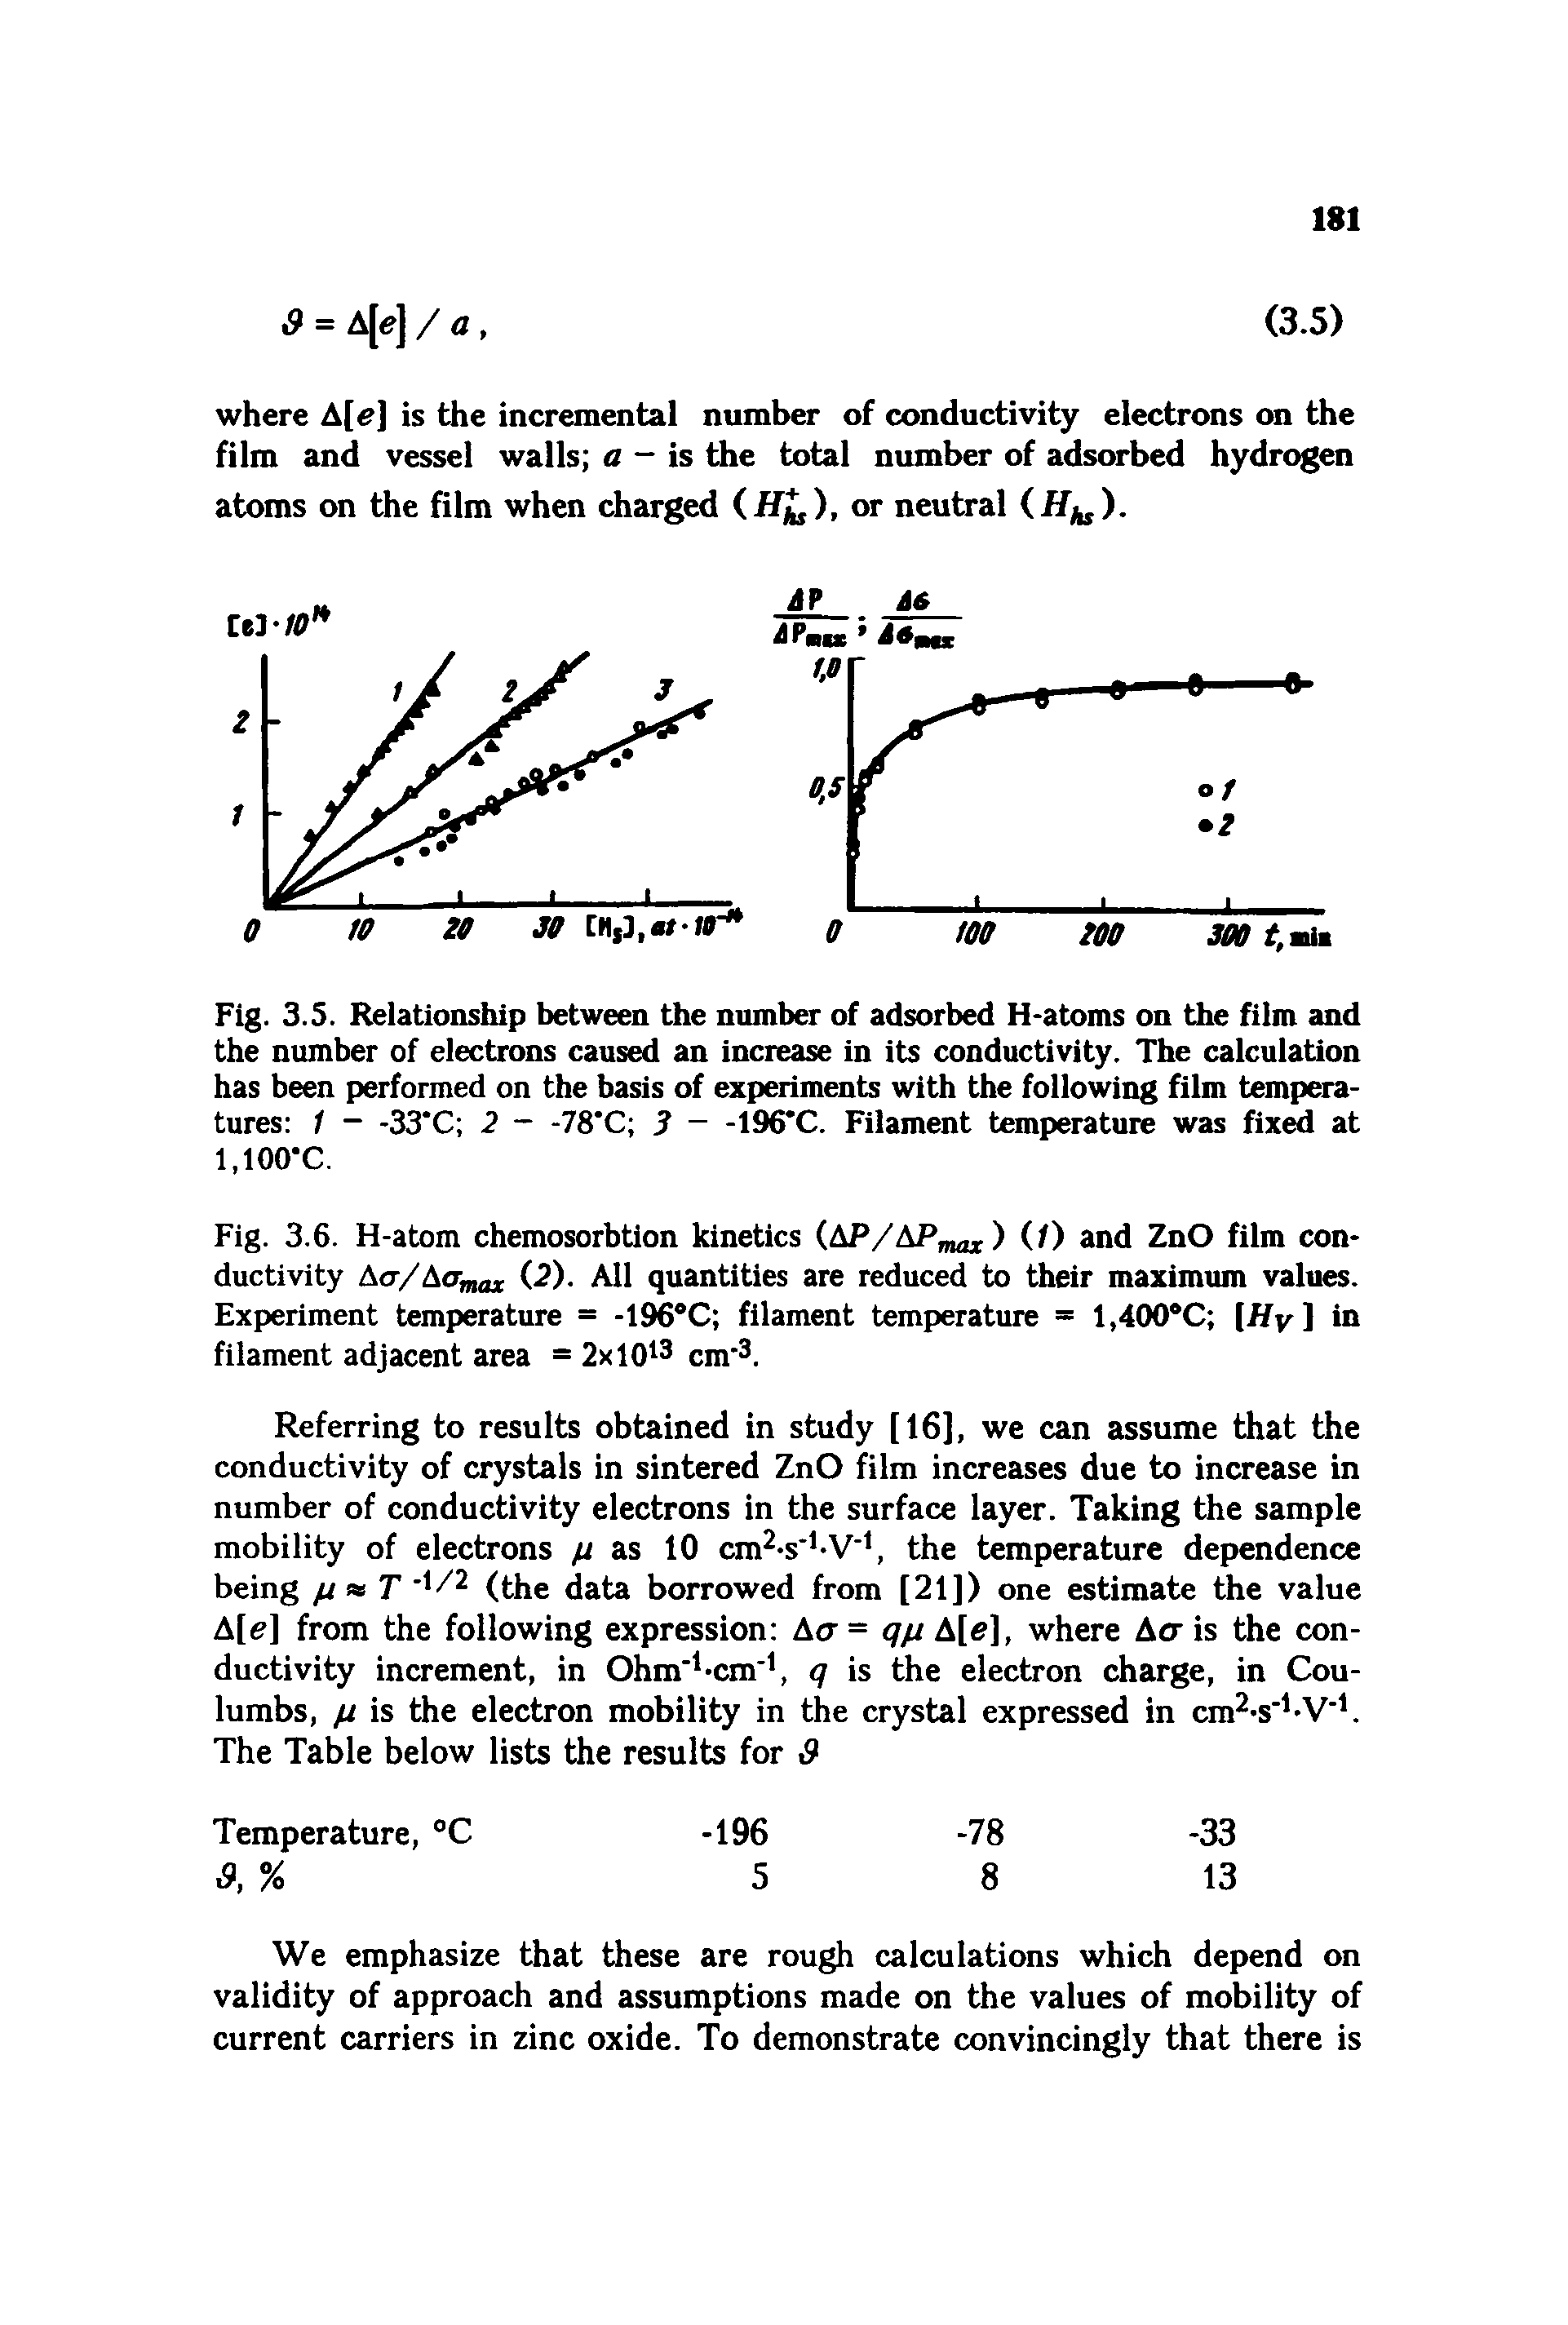 Fig. 3.3. Relationship between the number of adsorbed H-atoms on the film and the number of electrons caused an increase in its conductivity. The calculation has been performed on the basis of experiments with the following film temperatures 1 - -33 C 2 - -78 C 3 -196 C. Filament temperature was fix at 1,100 C.